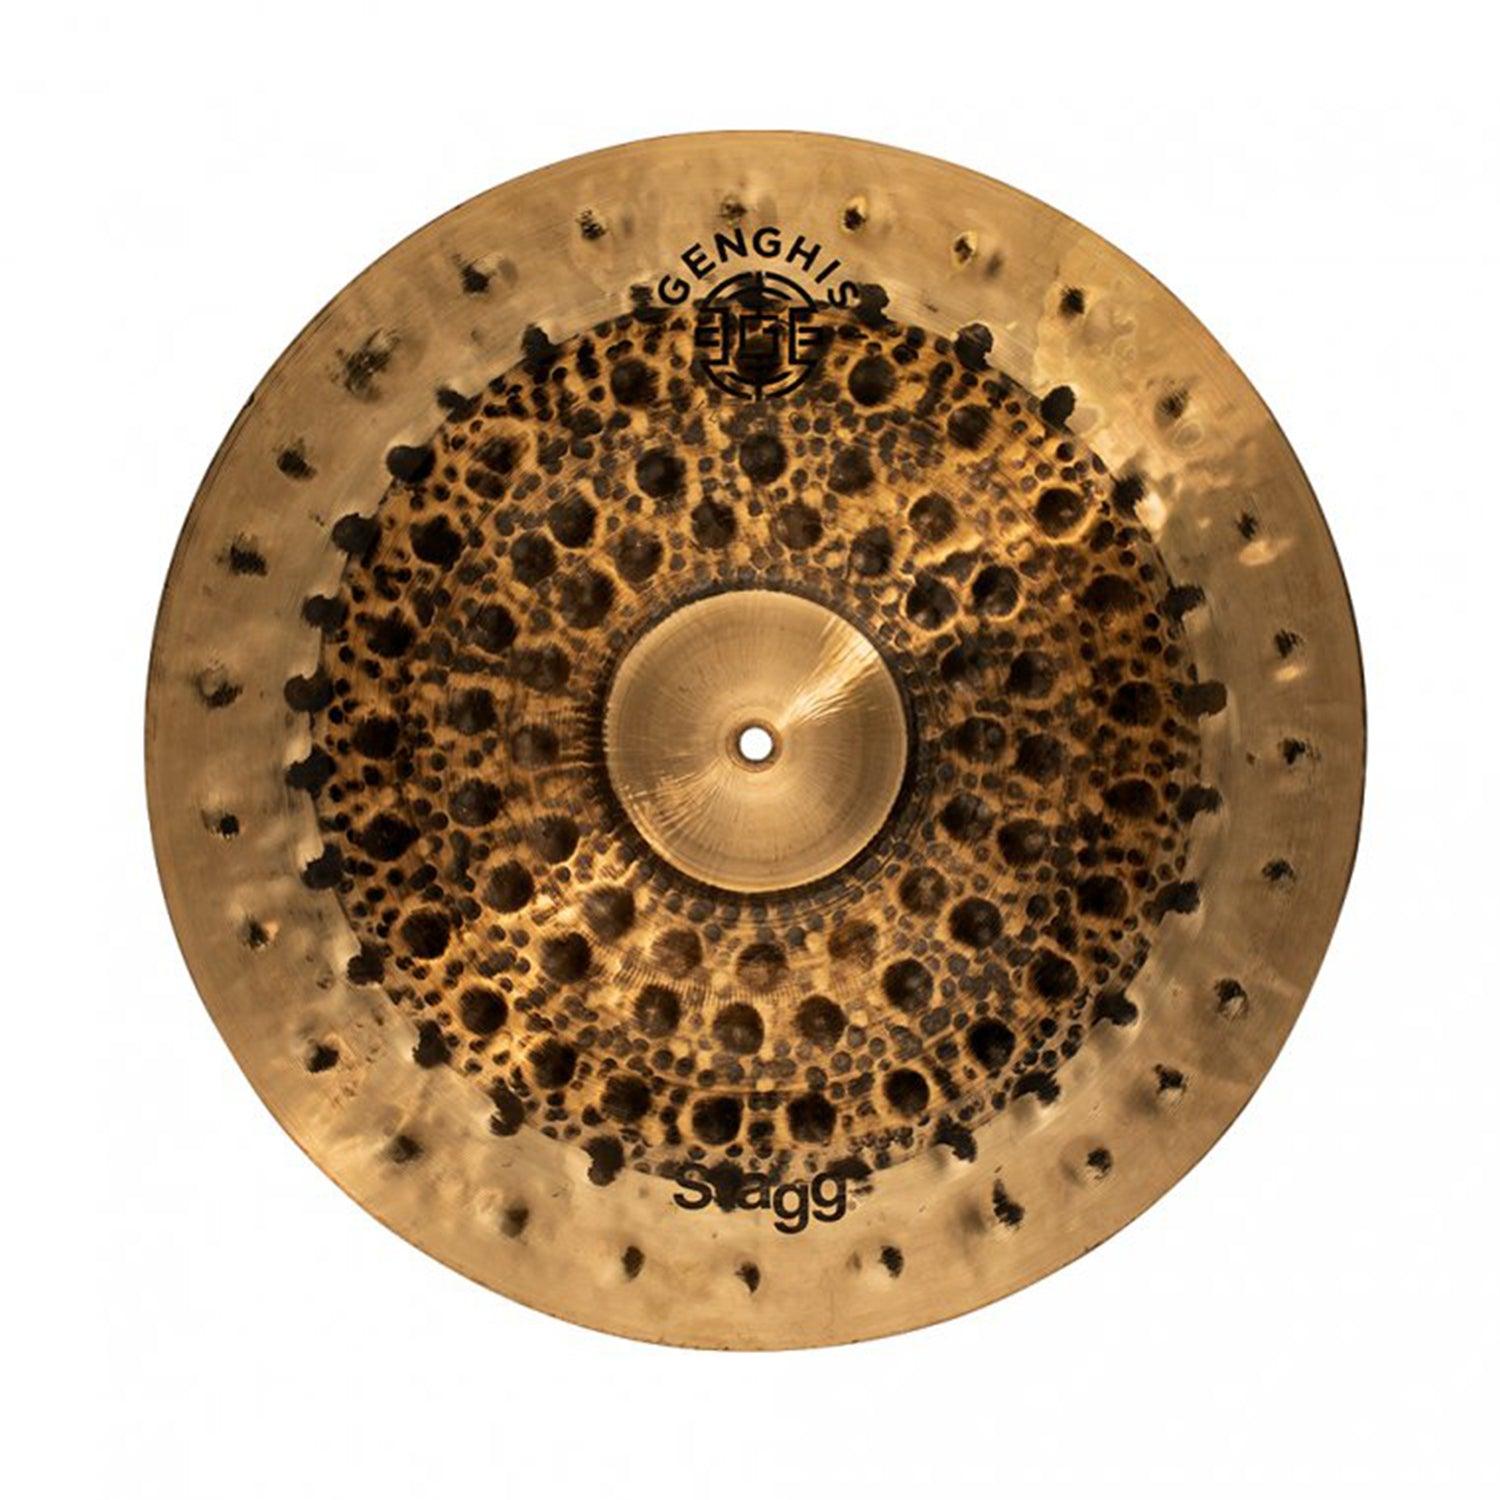 Stagg GENG-RM20D 20" Genghis medium ride Dual series Cymbal - DY Pro Audio